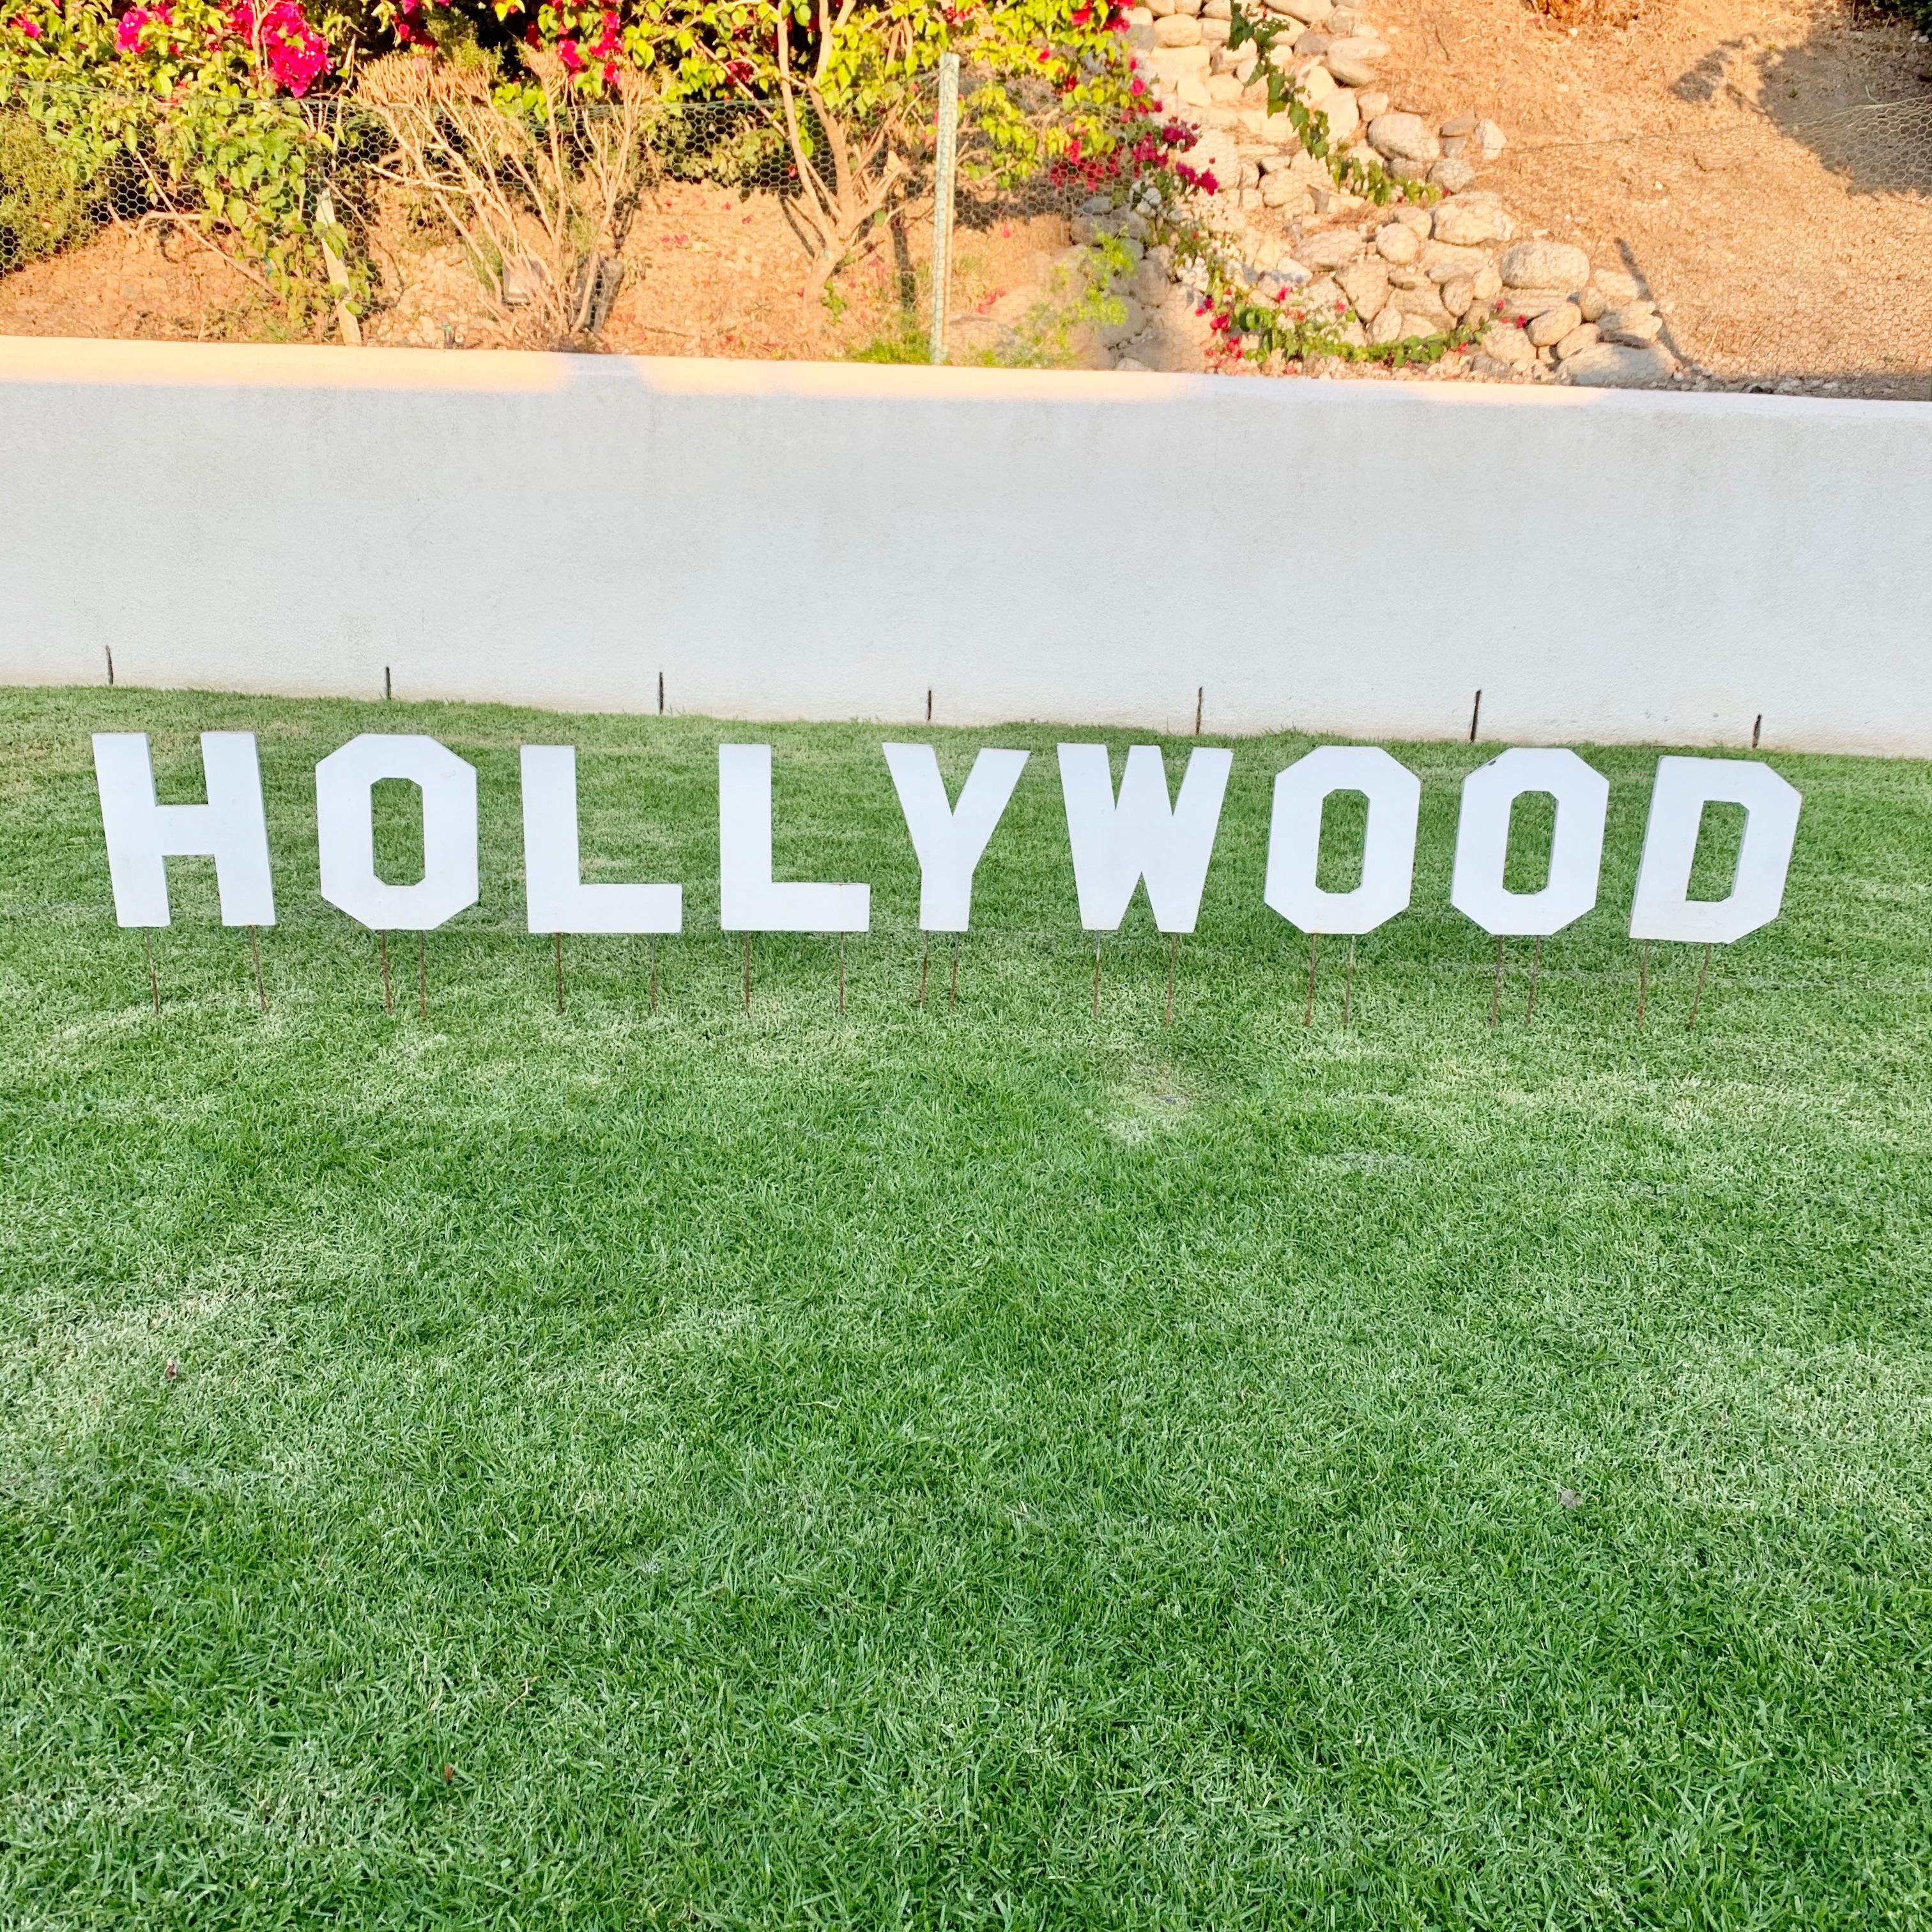 Contemporary Hollywood Sign Artist Model For Sale